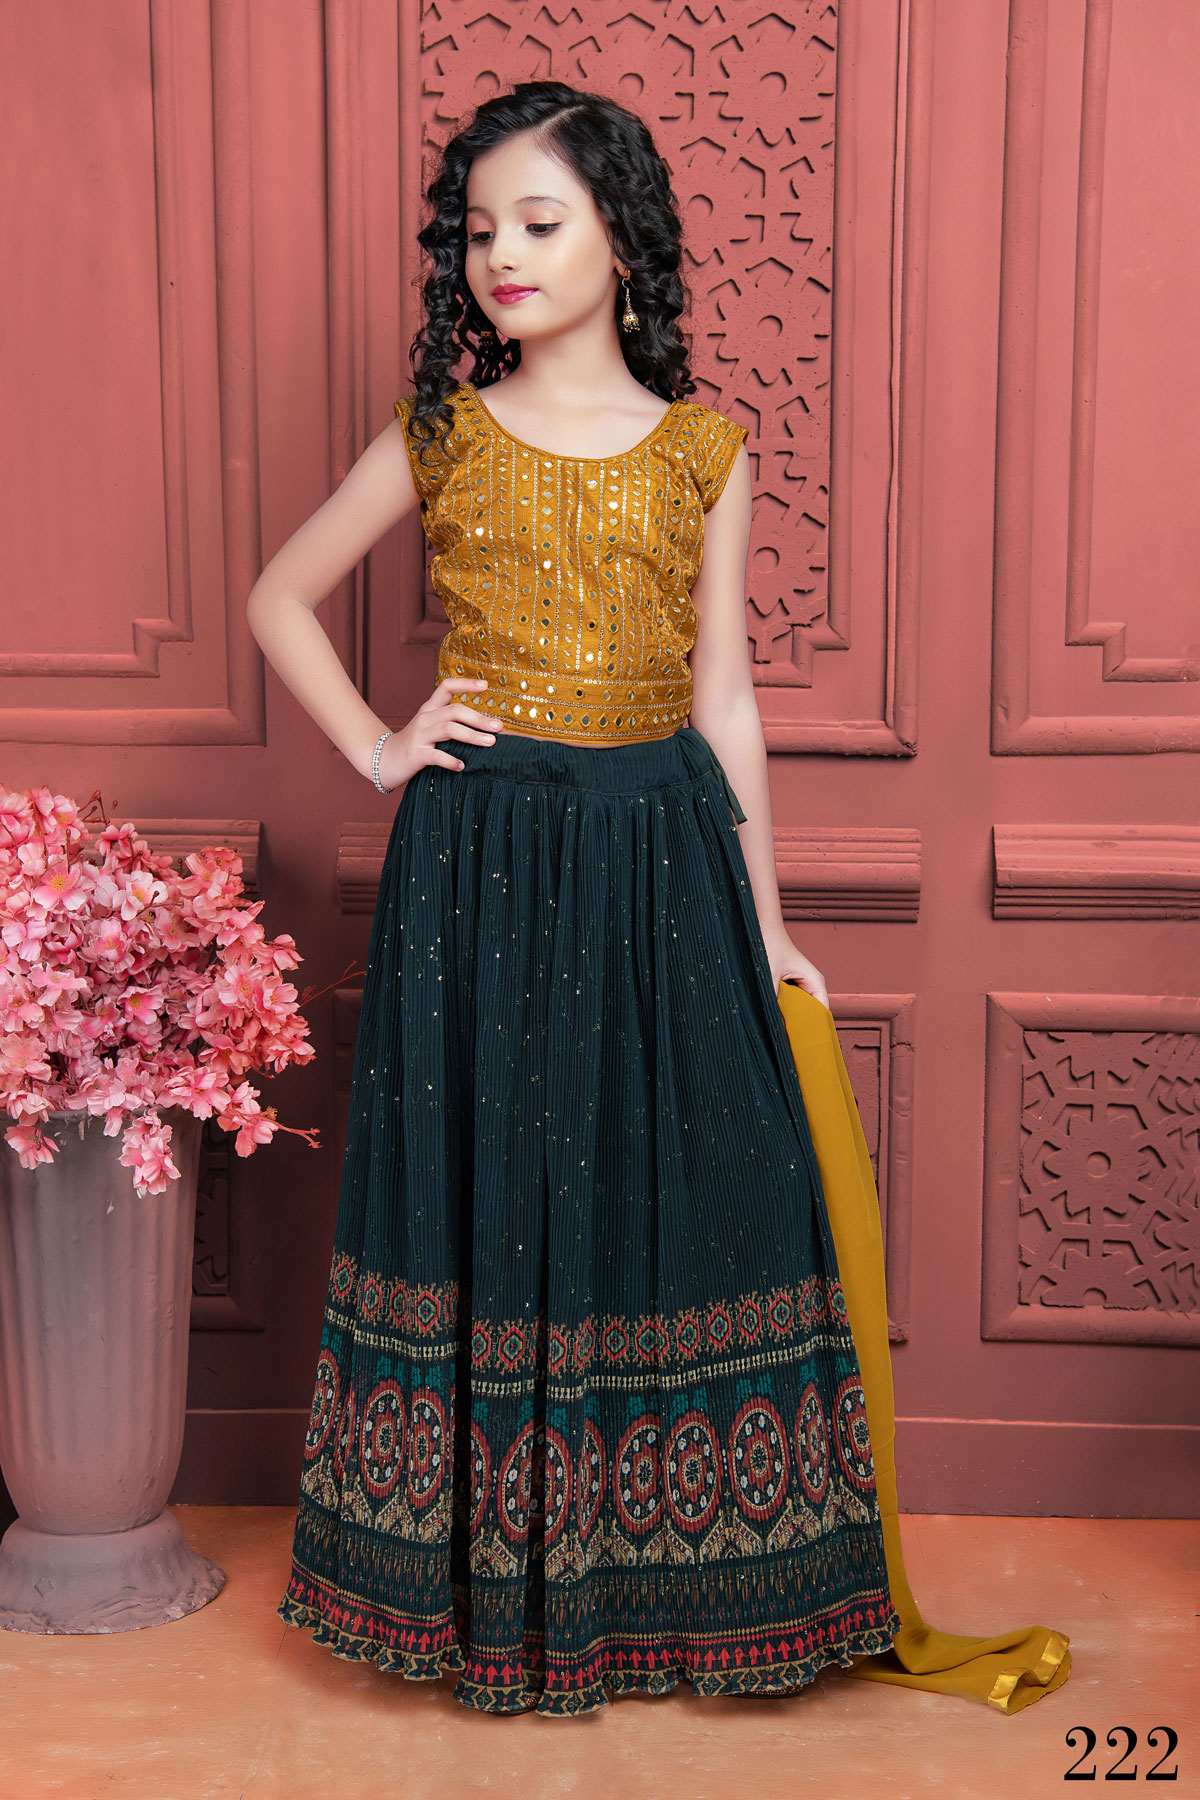 HOT SELLING BEST DESIGNER PARTY WEAR LEHENGA CHOLI IN NET WITH SEQUENCE  WORK ARYA 18001-18004 … | Indian wedding lehenga, Bridal lehenga choli,  Indian wedding dress